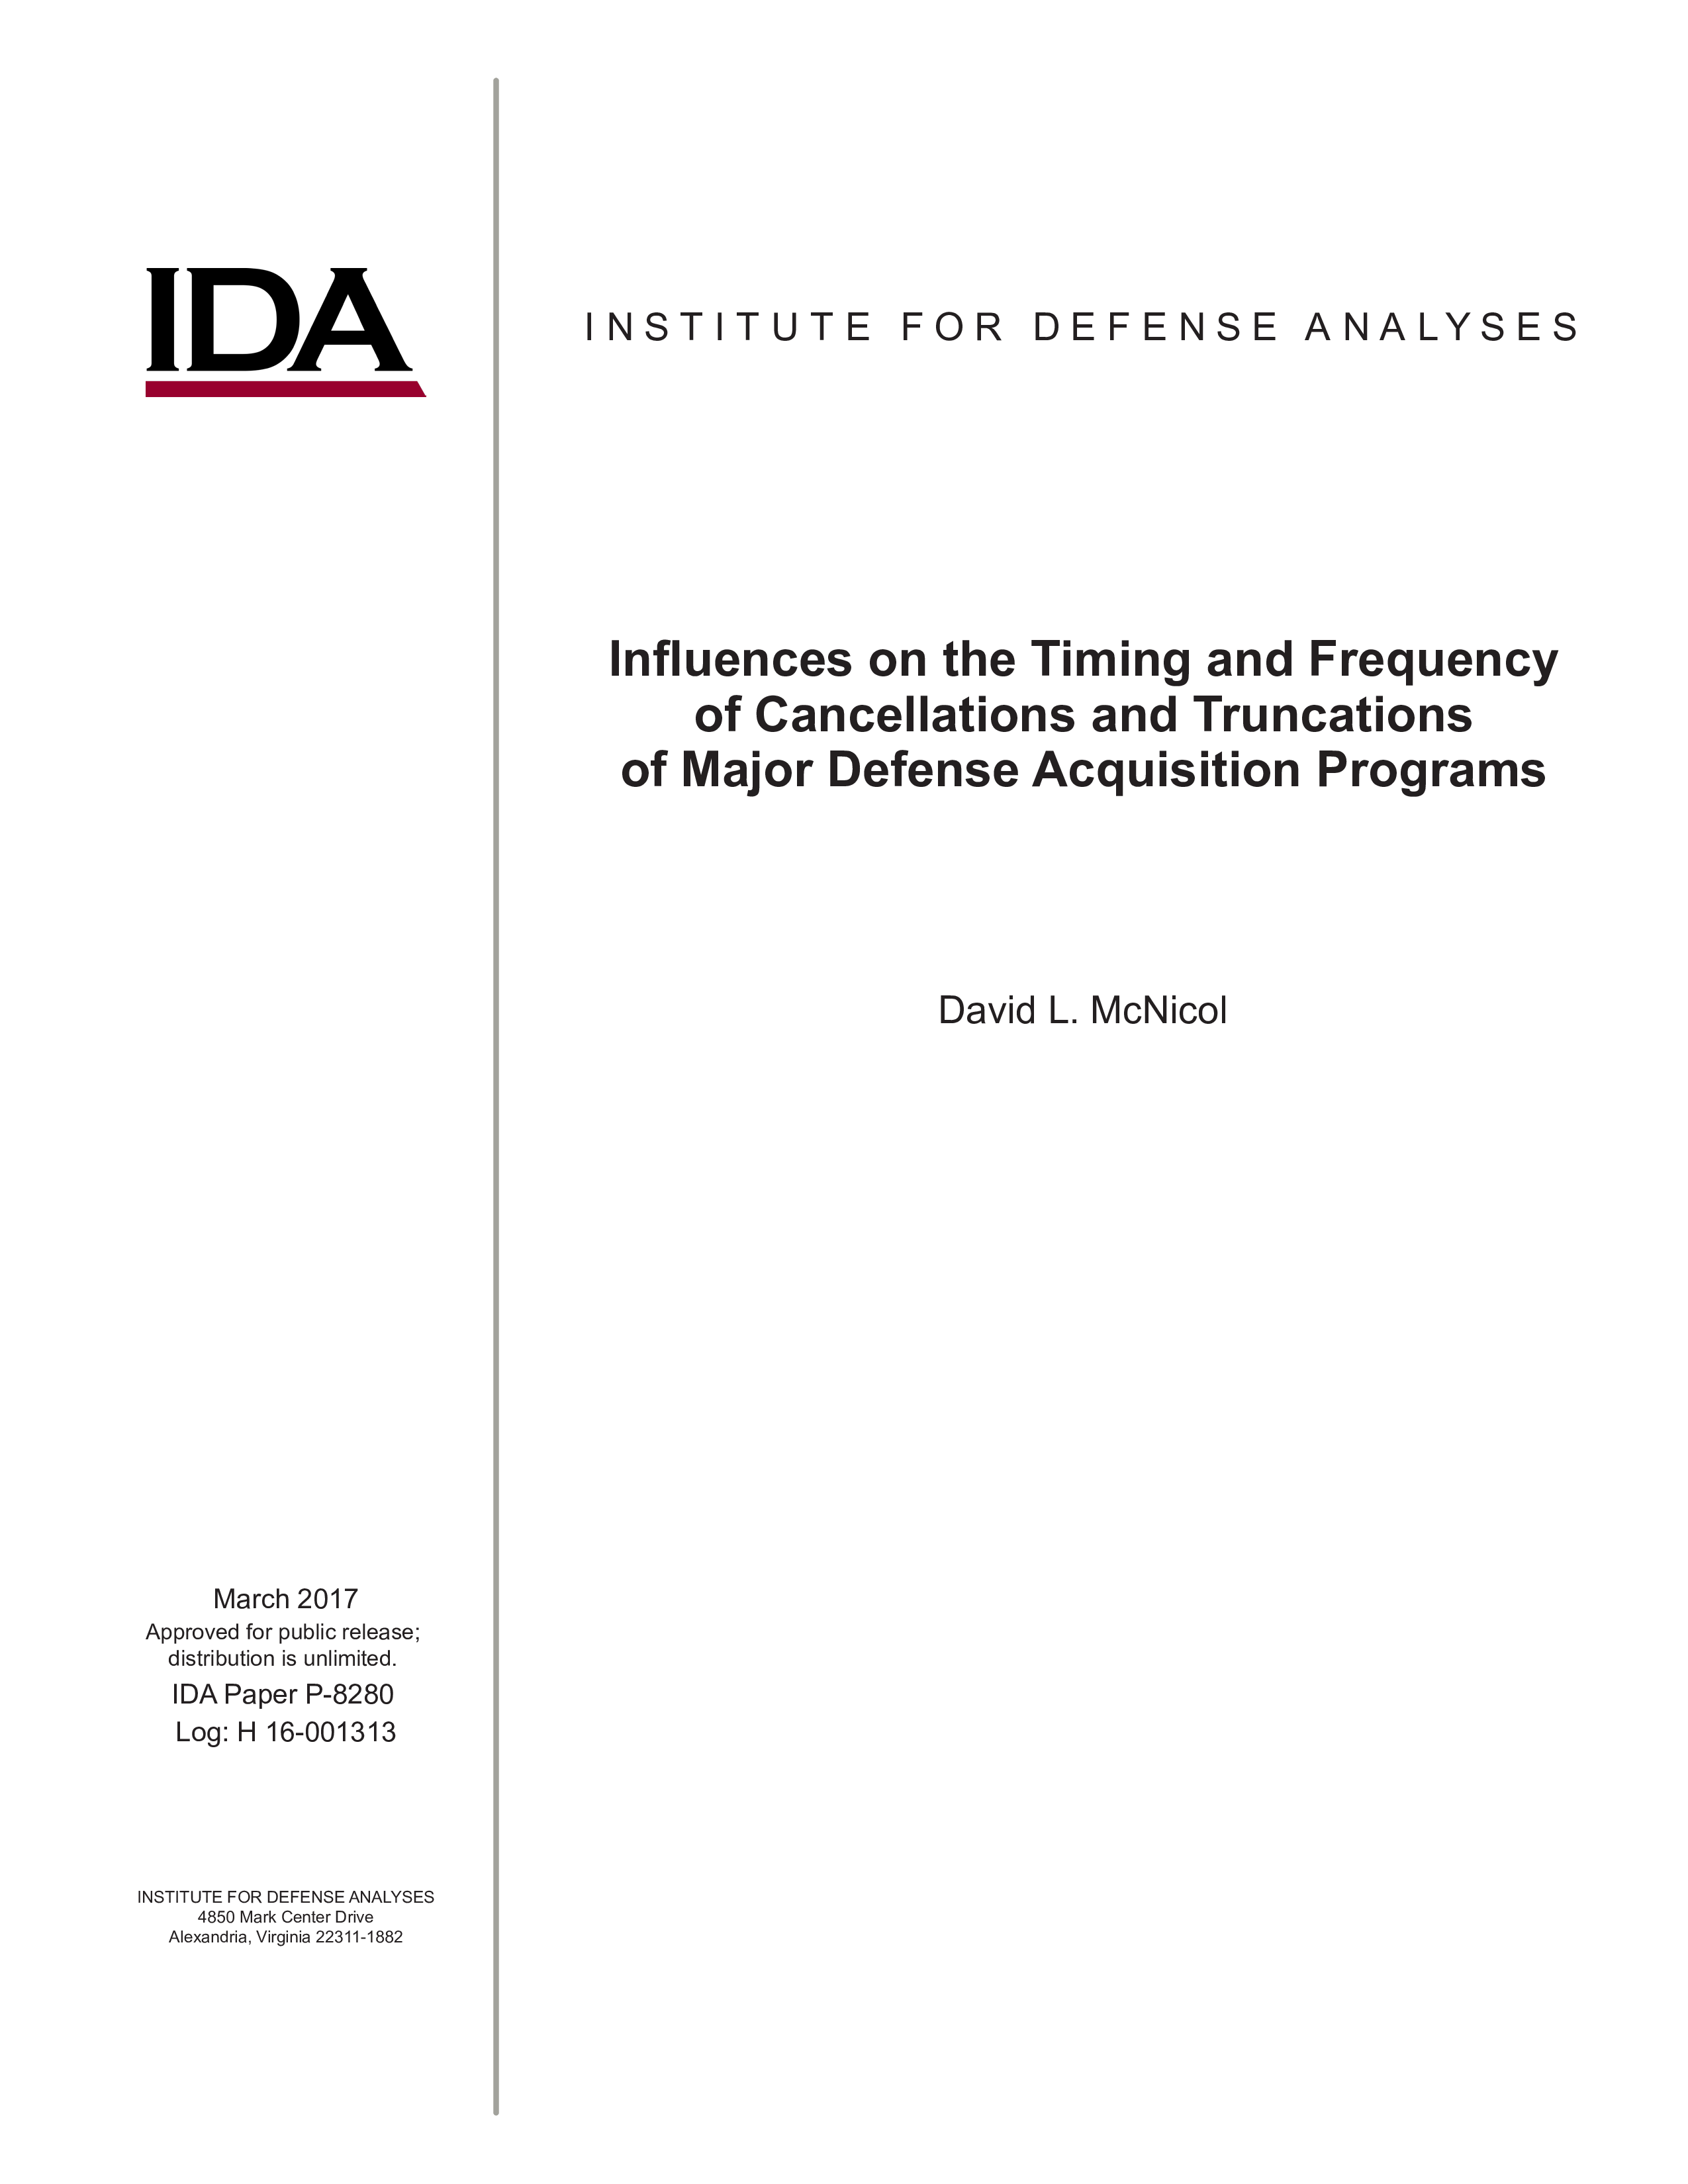 Influences on the Timing and Frequency of Cancellations and Truncations of Major Defense Acquisition Programs